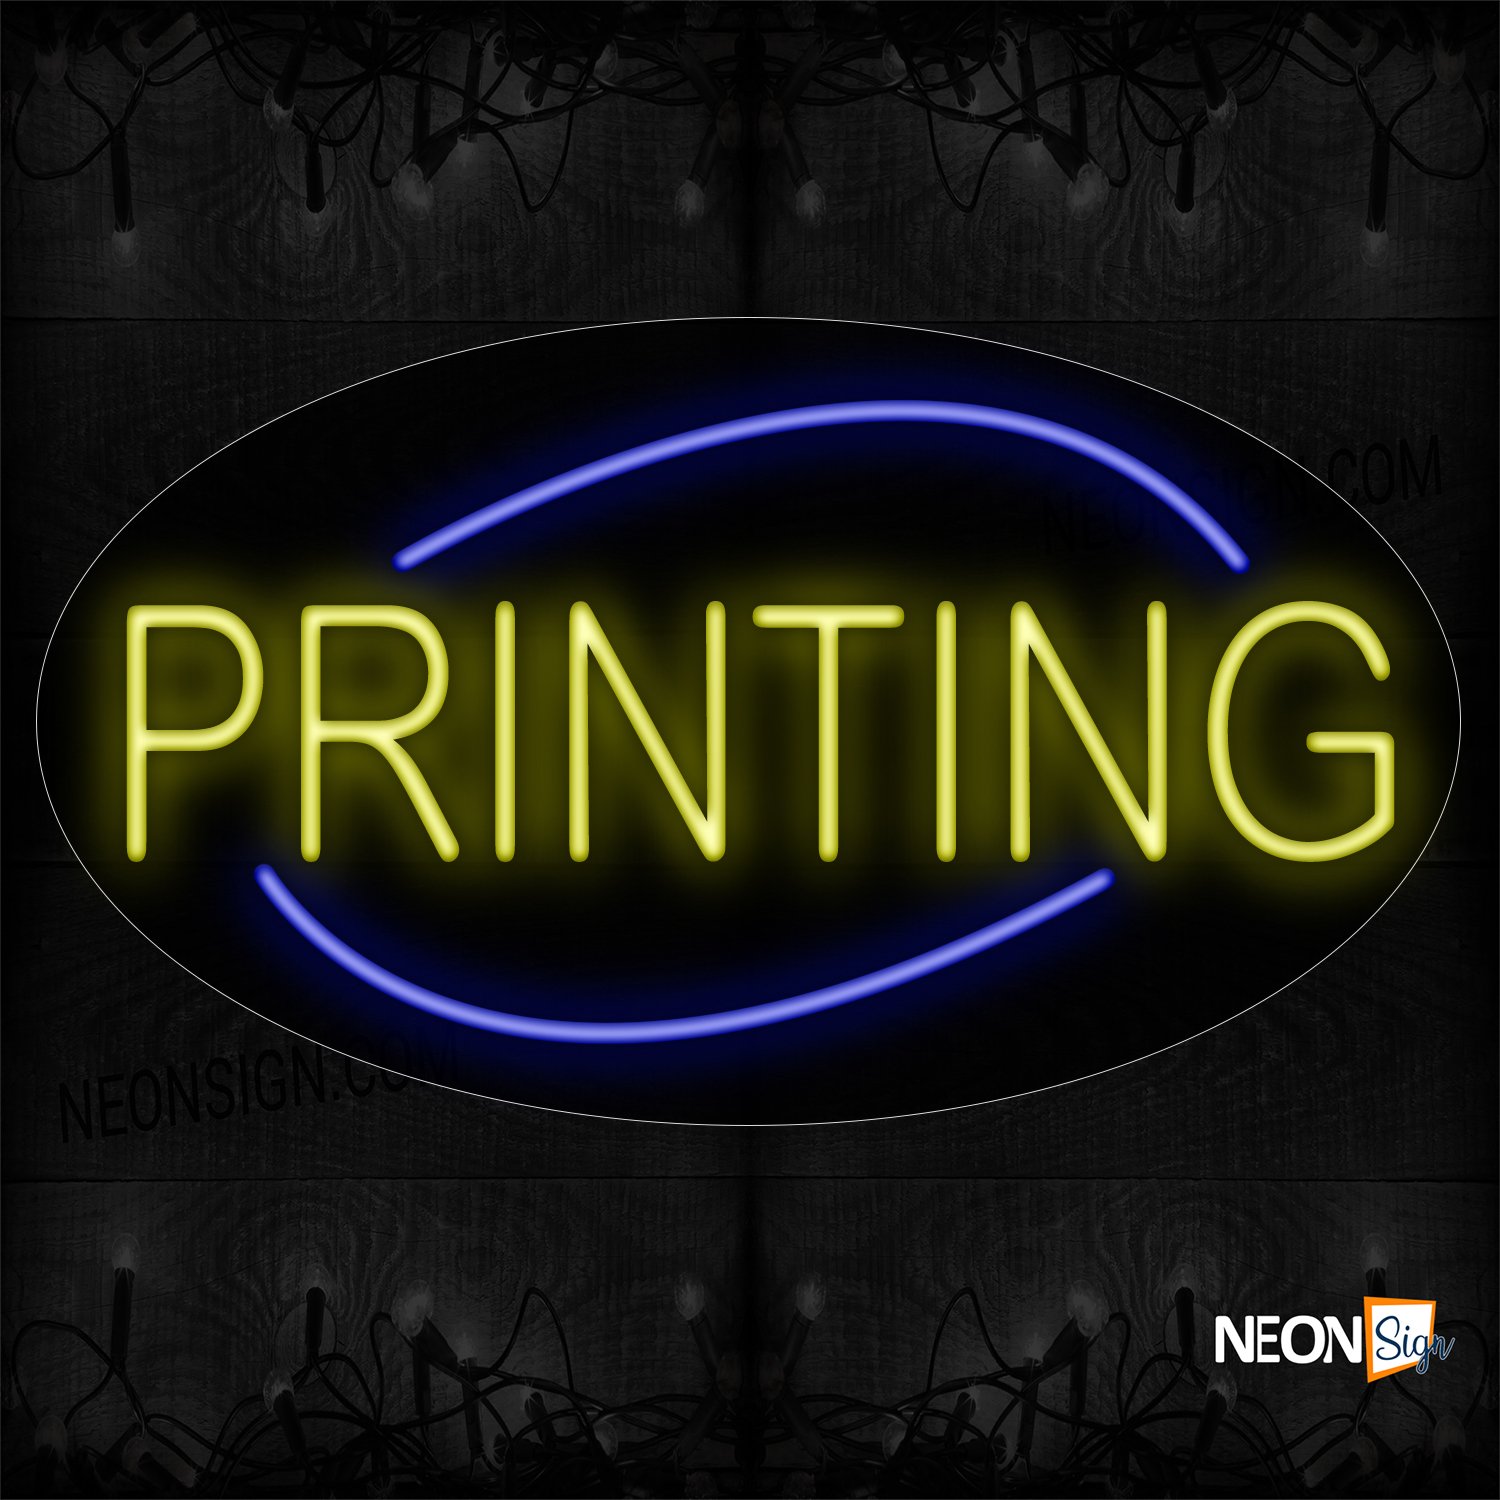 Image of 14069 Printing In Yellow With Blue Arc Border Neon Signs_17x30 Contoured Black Backing